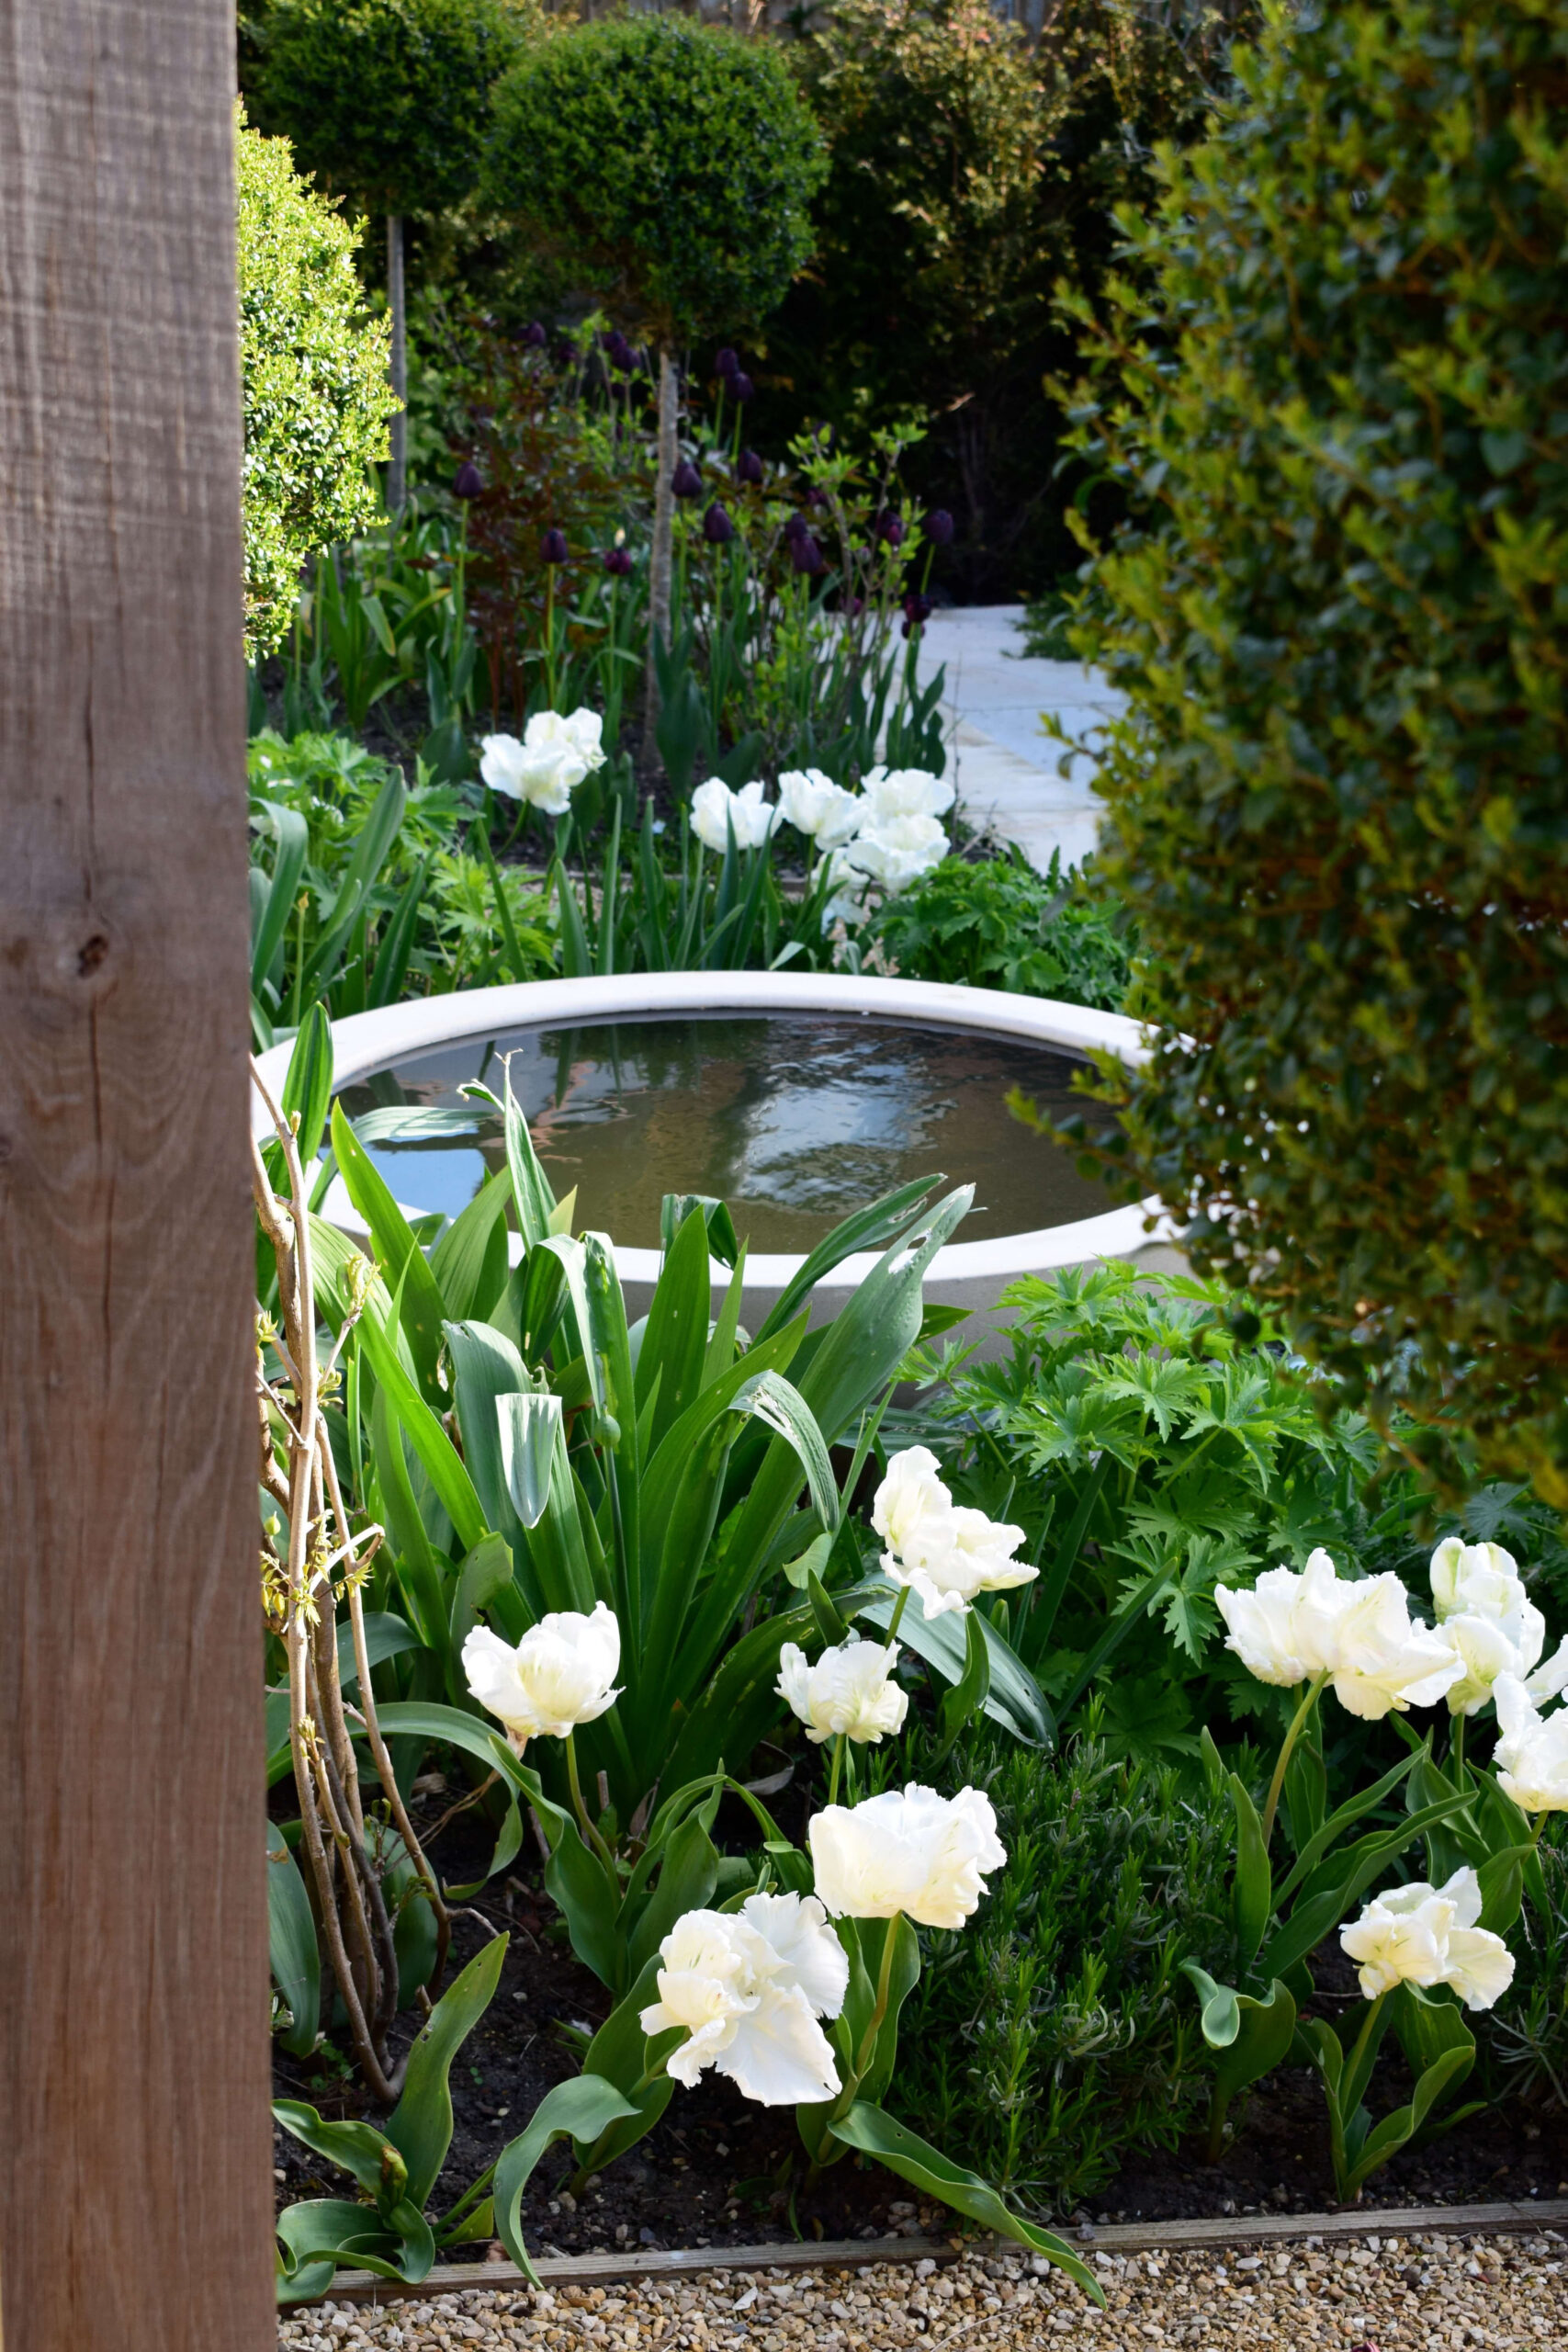 water bowl feature in a small green designed garden